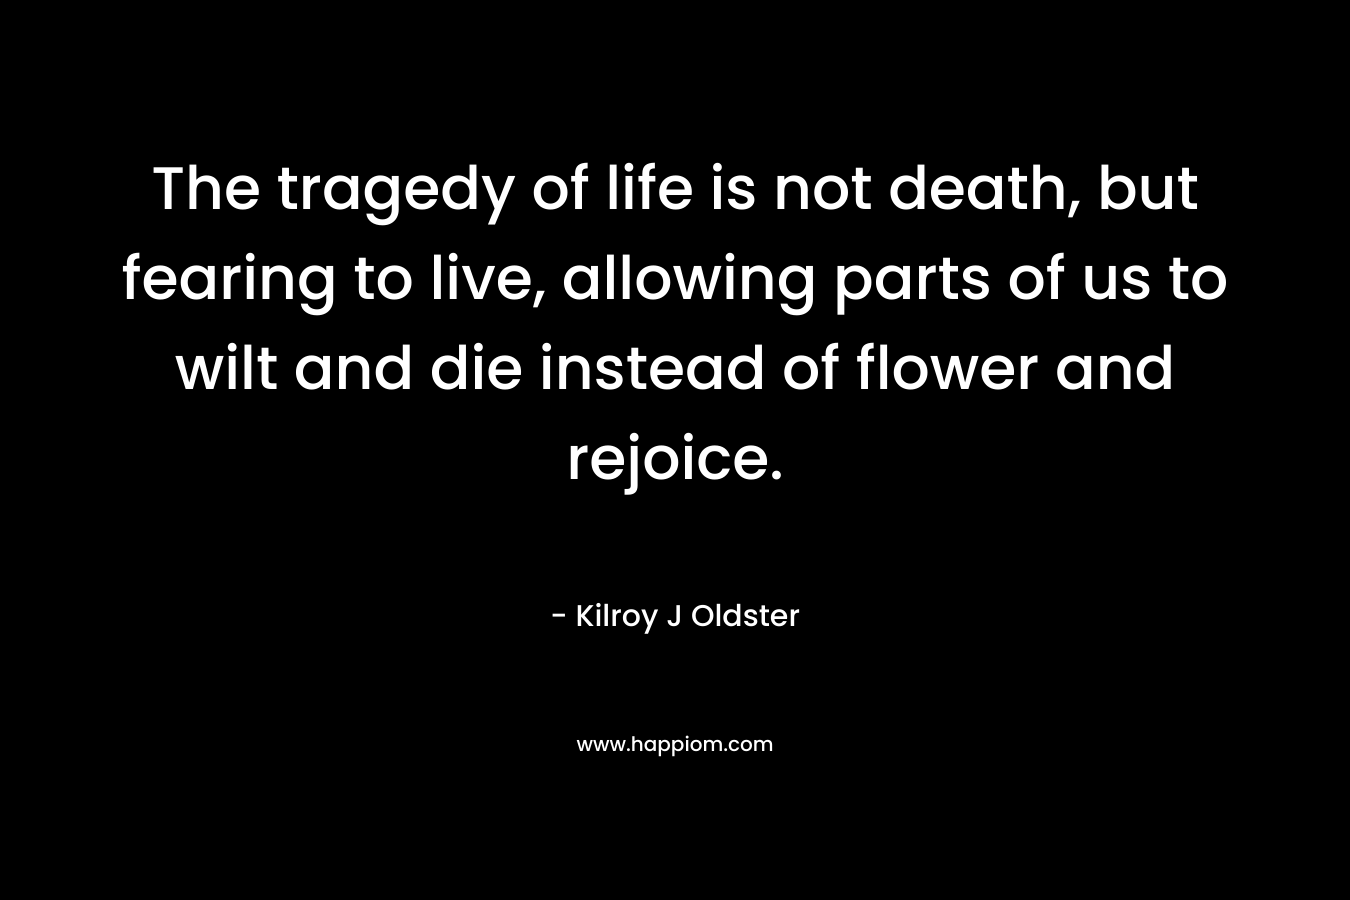 The tragedy of life is not death, but fearing to live, allowing parts of us to wilt and die instead of flower and rejoice. – Kilroy J Oldster